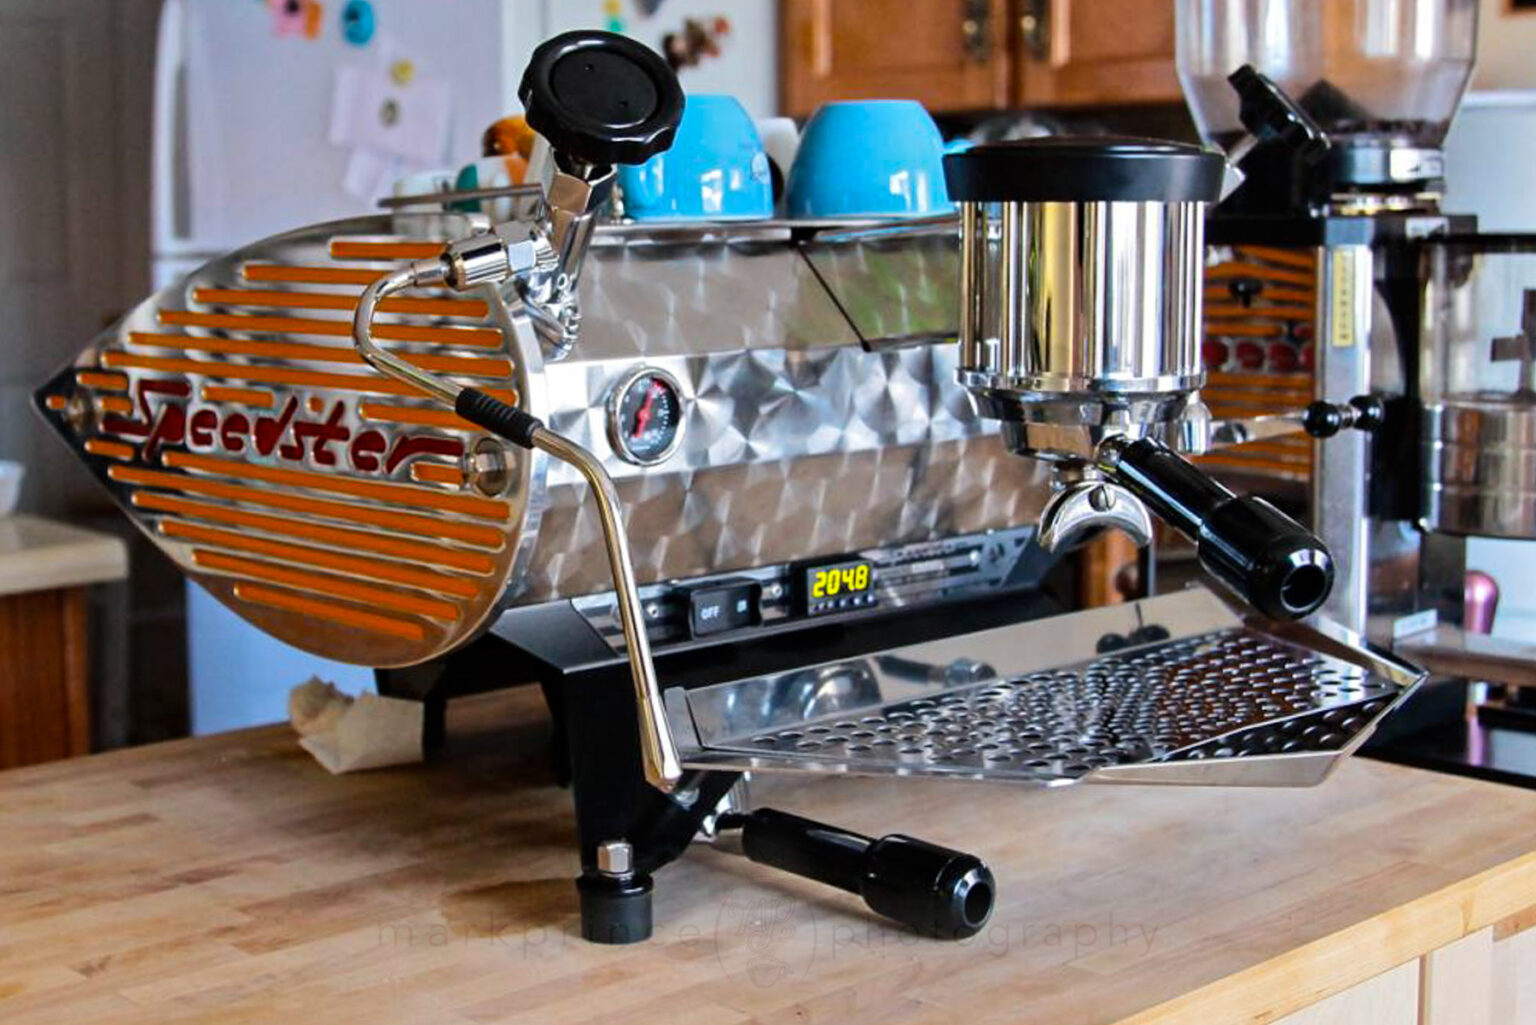 The first day I owned the Speedster Espresso Machine. It was initially paired up with a customized grinder I bought from 49th Parallel.